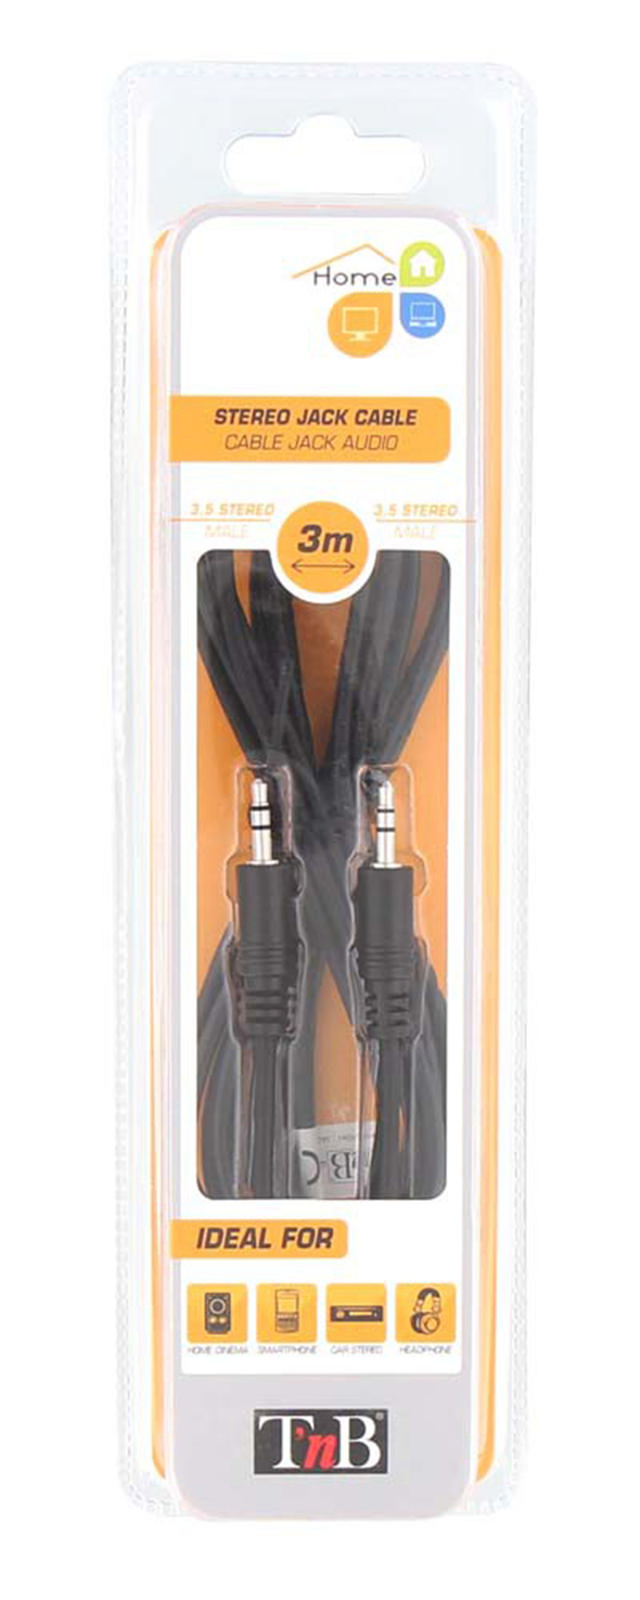 TNB STEREO JACK CABLE 3M